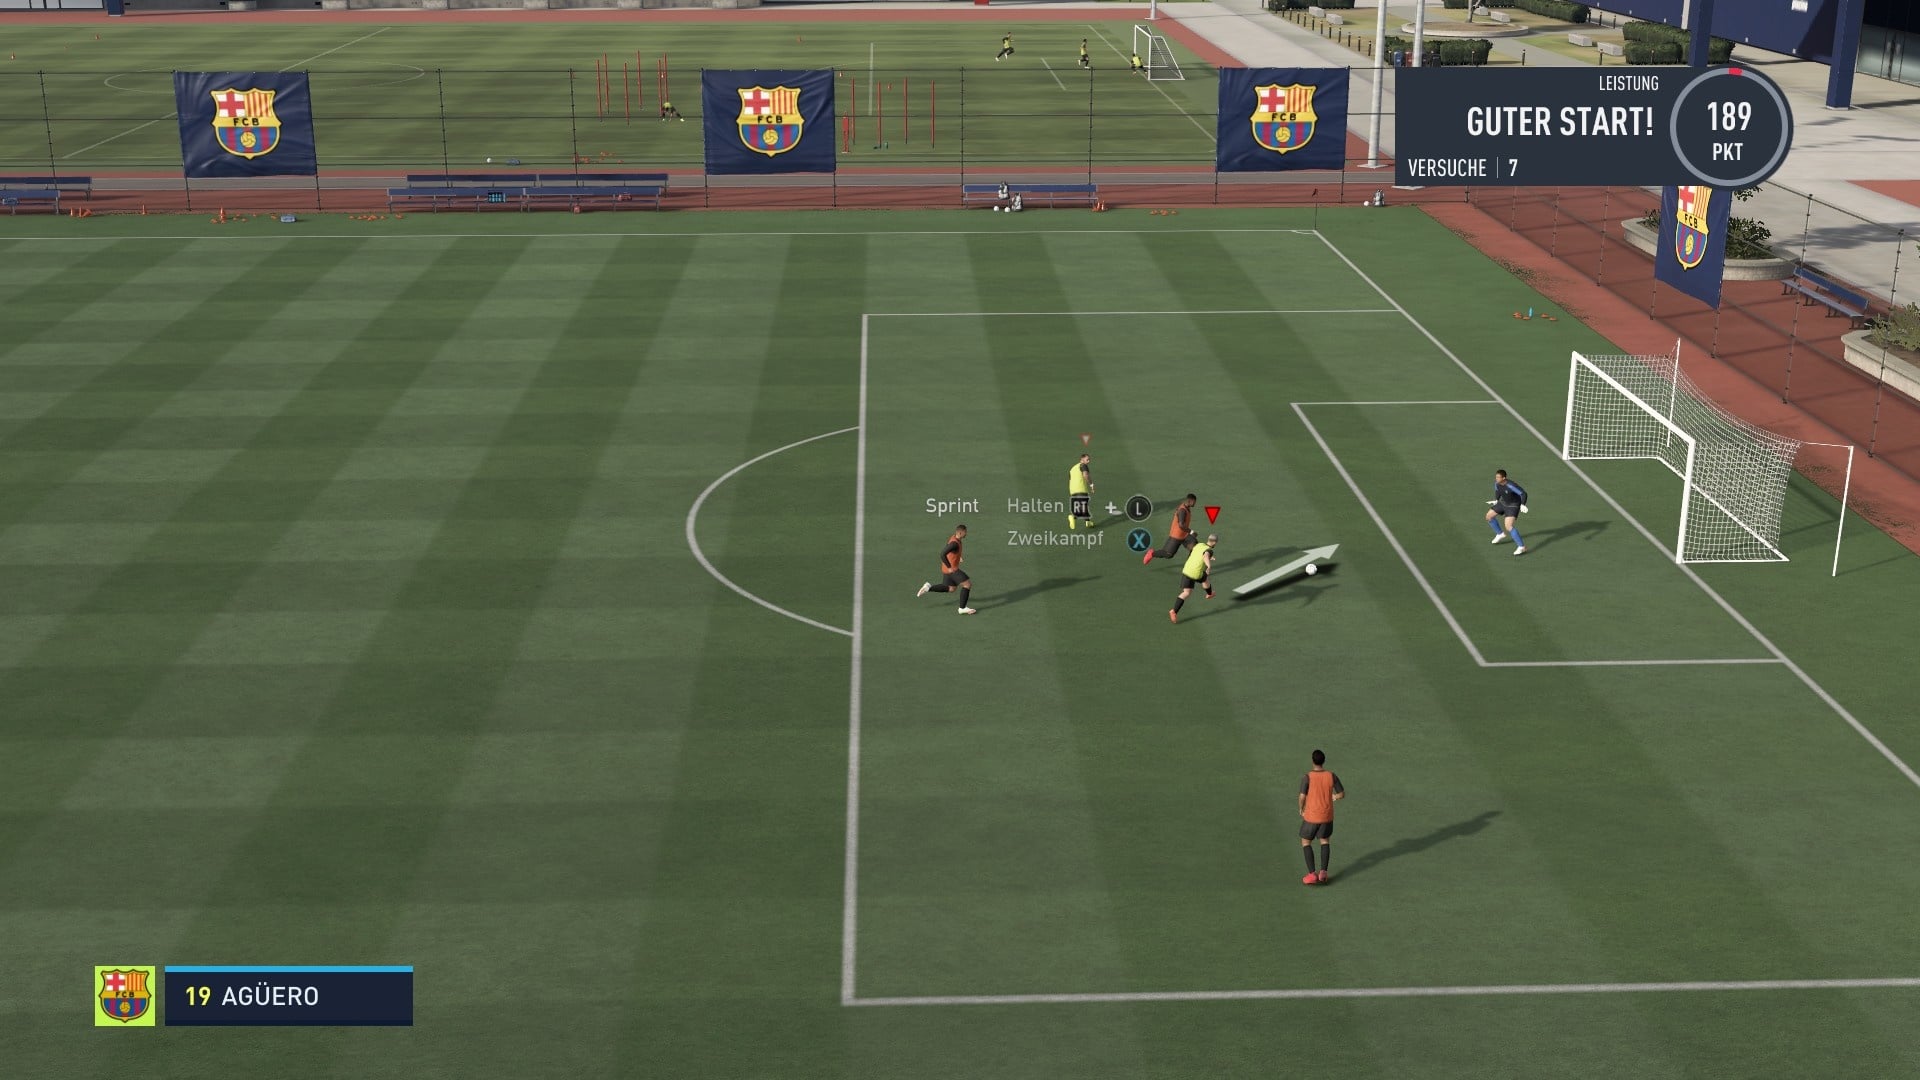 The skill training sessions teach you a range of gameplay subtleties - especially the higher-level game situations with goal finishes are always fun to play.